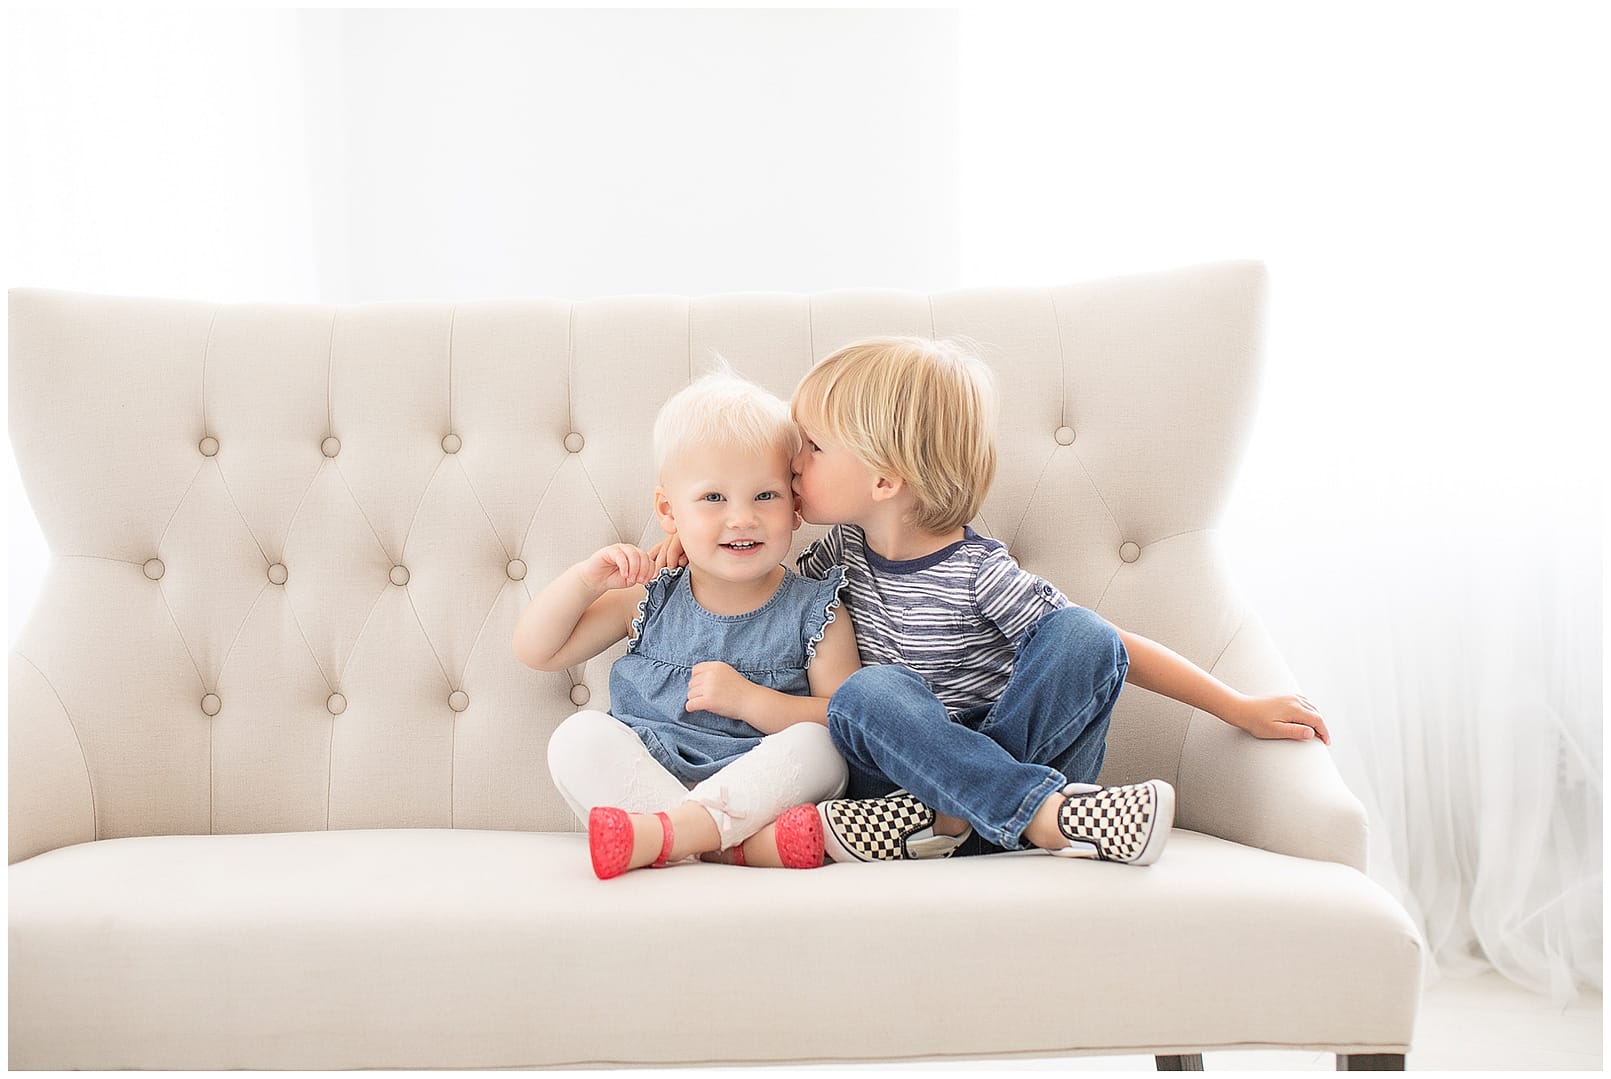 Siblings in studio. Photos by Tiffany Hix Photography.